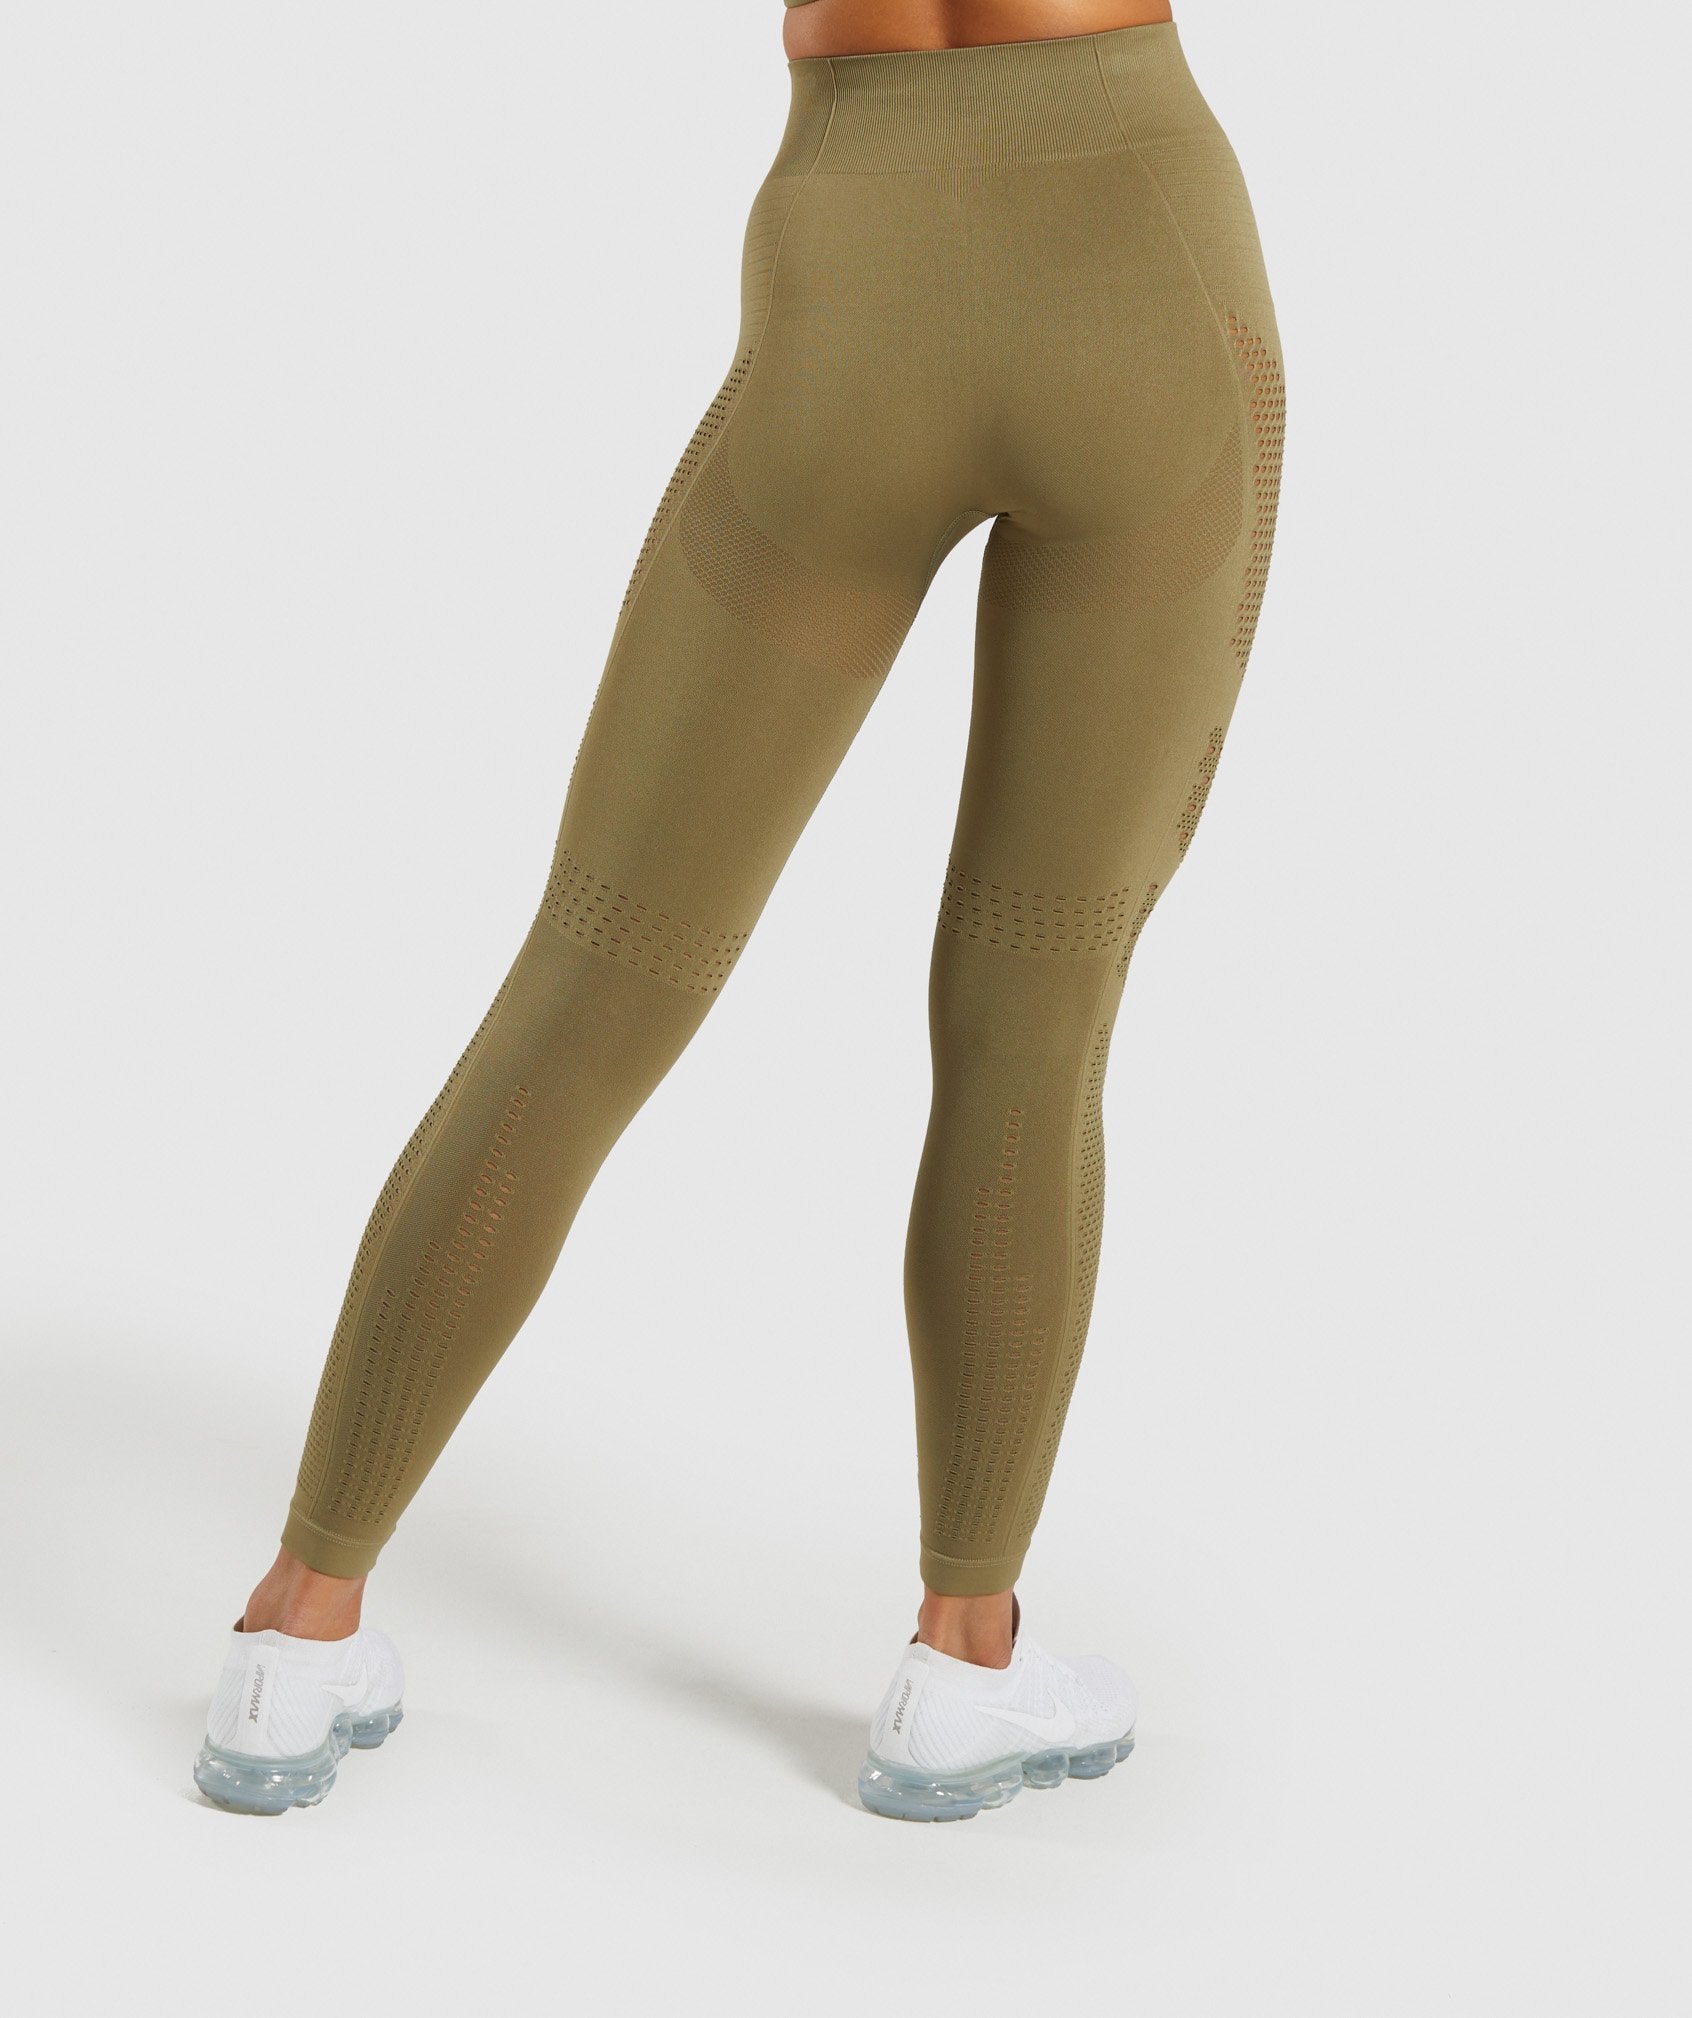 Flawless Knit Tights in Khaki - view 2